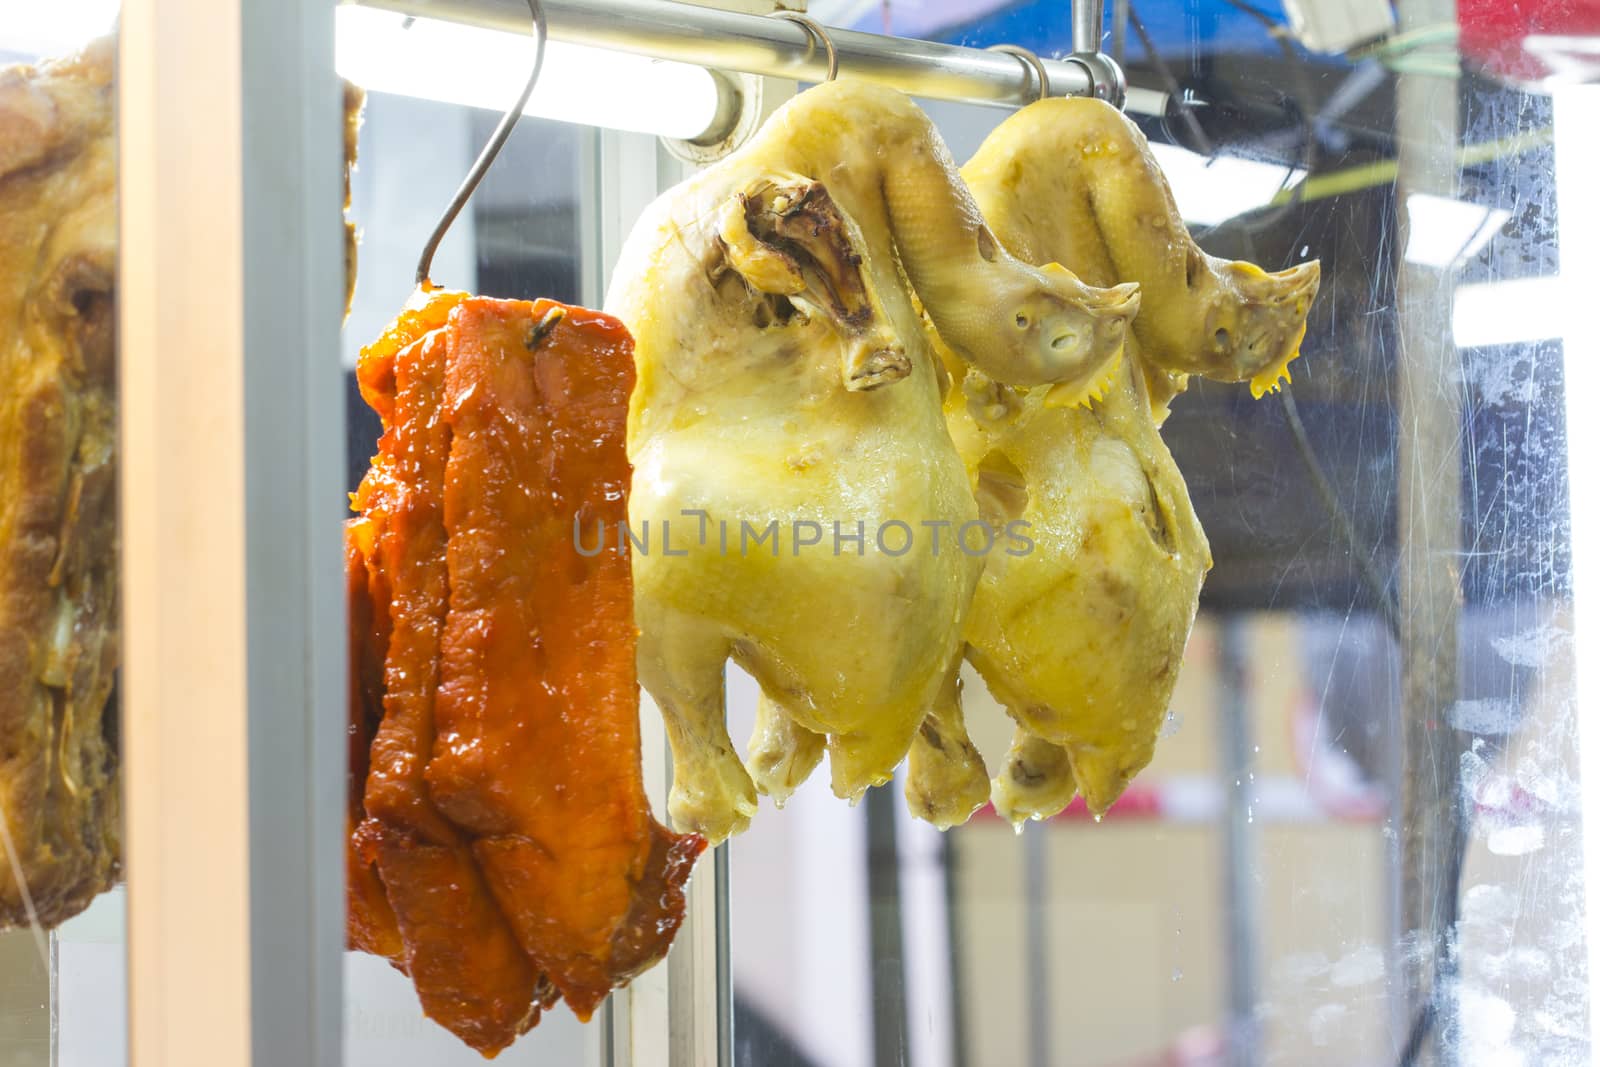 Boiled chickens and cooked red pork - Popular Thailand food by a3701027